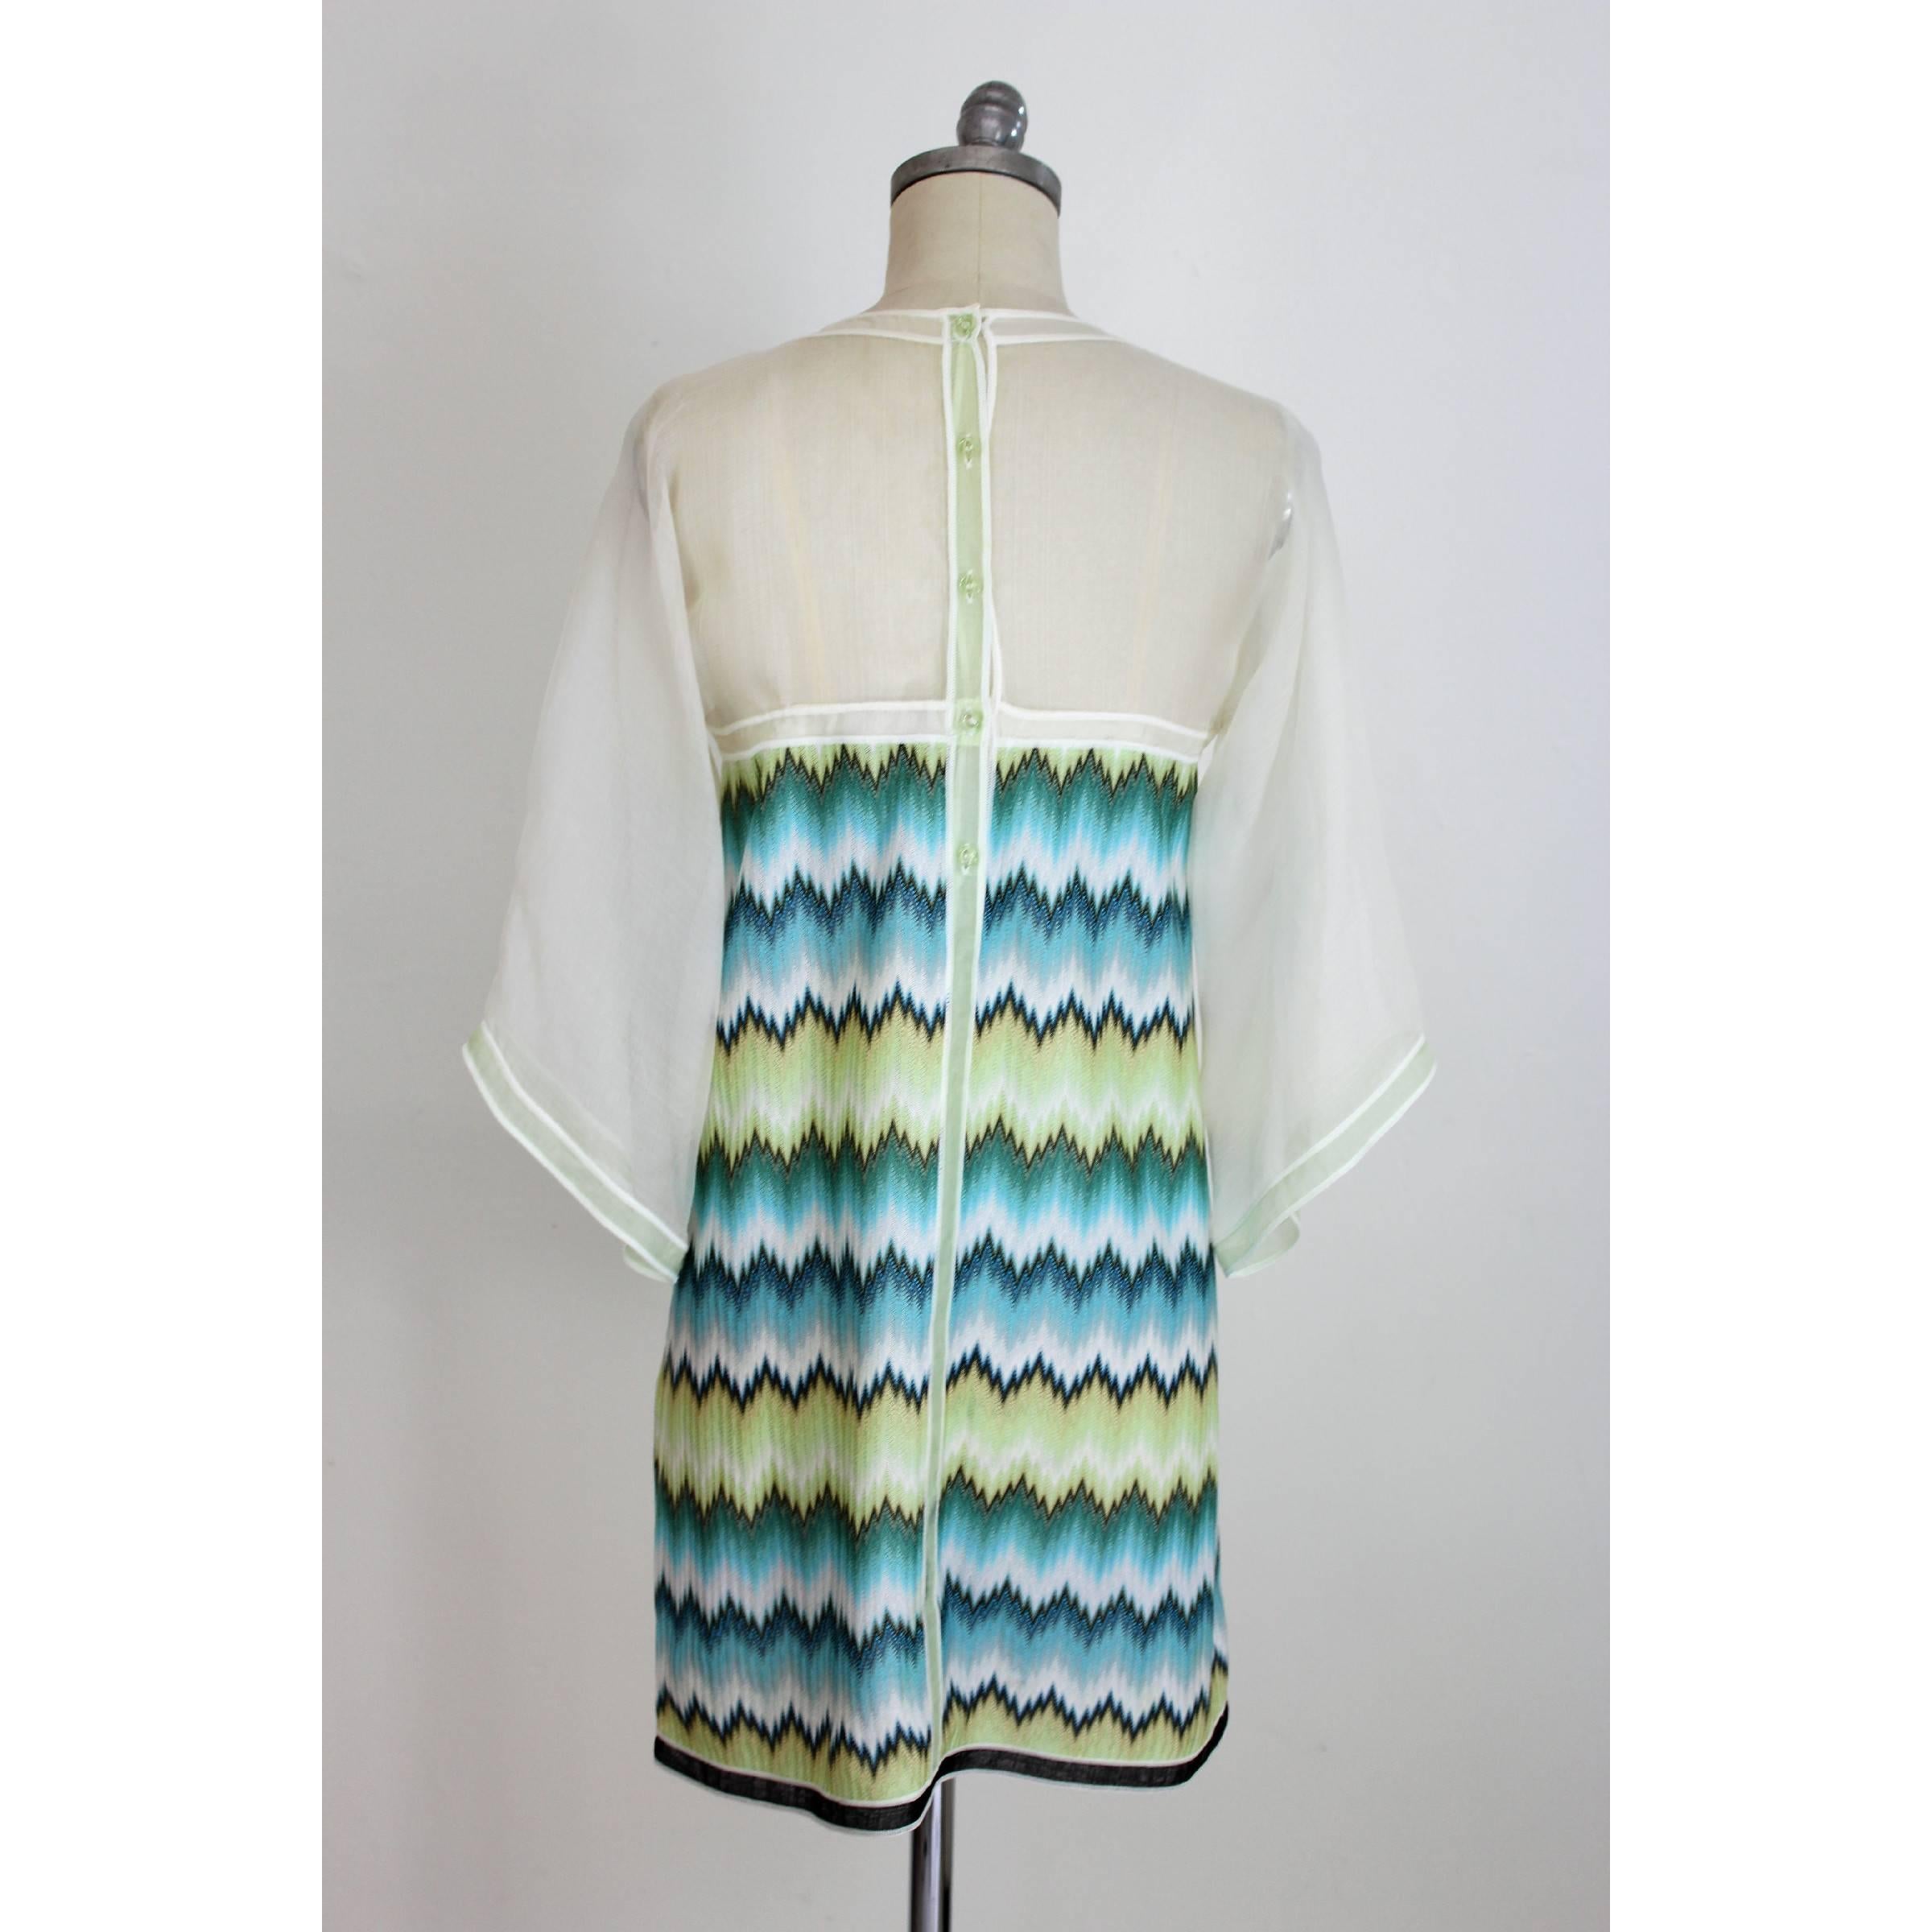 Missoni ceremony dress, white, blue and green, 53% silk 47% viscose. Soft 3/4 transparent sleeve, the dress has the typical Missoni geometric designs with shades ranging from green to light blue. Made in Italy. Excellent vintage conditions.

Size 44